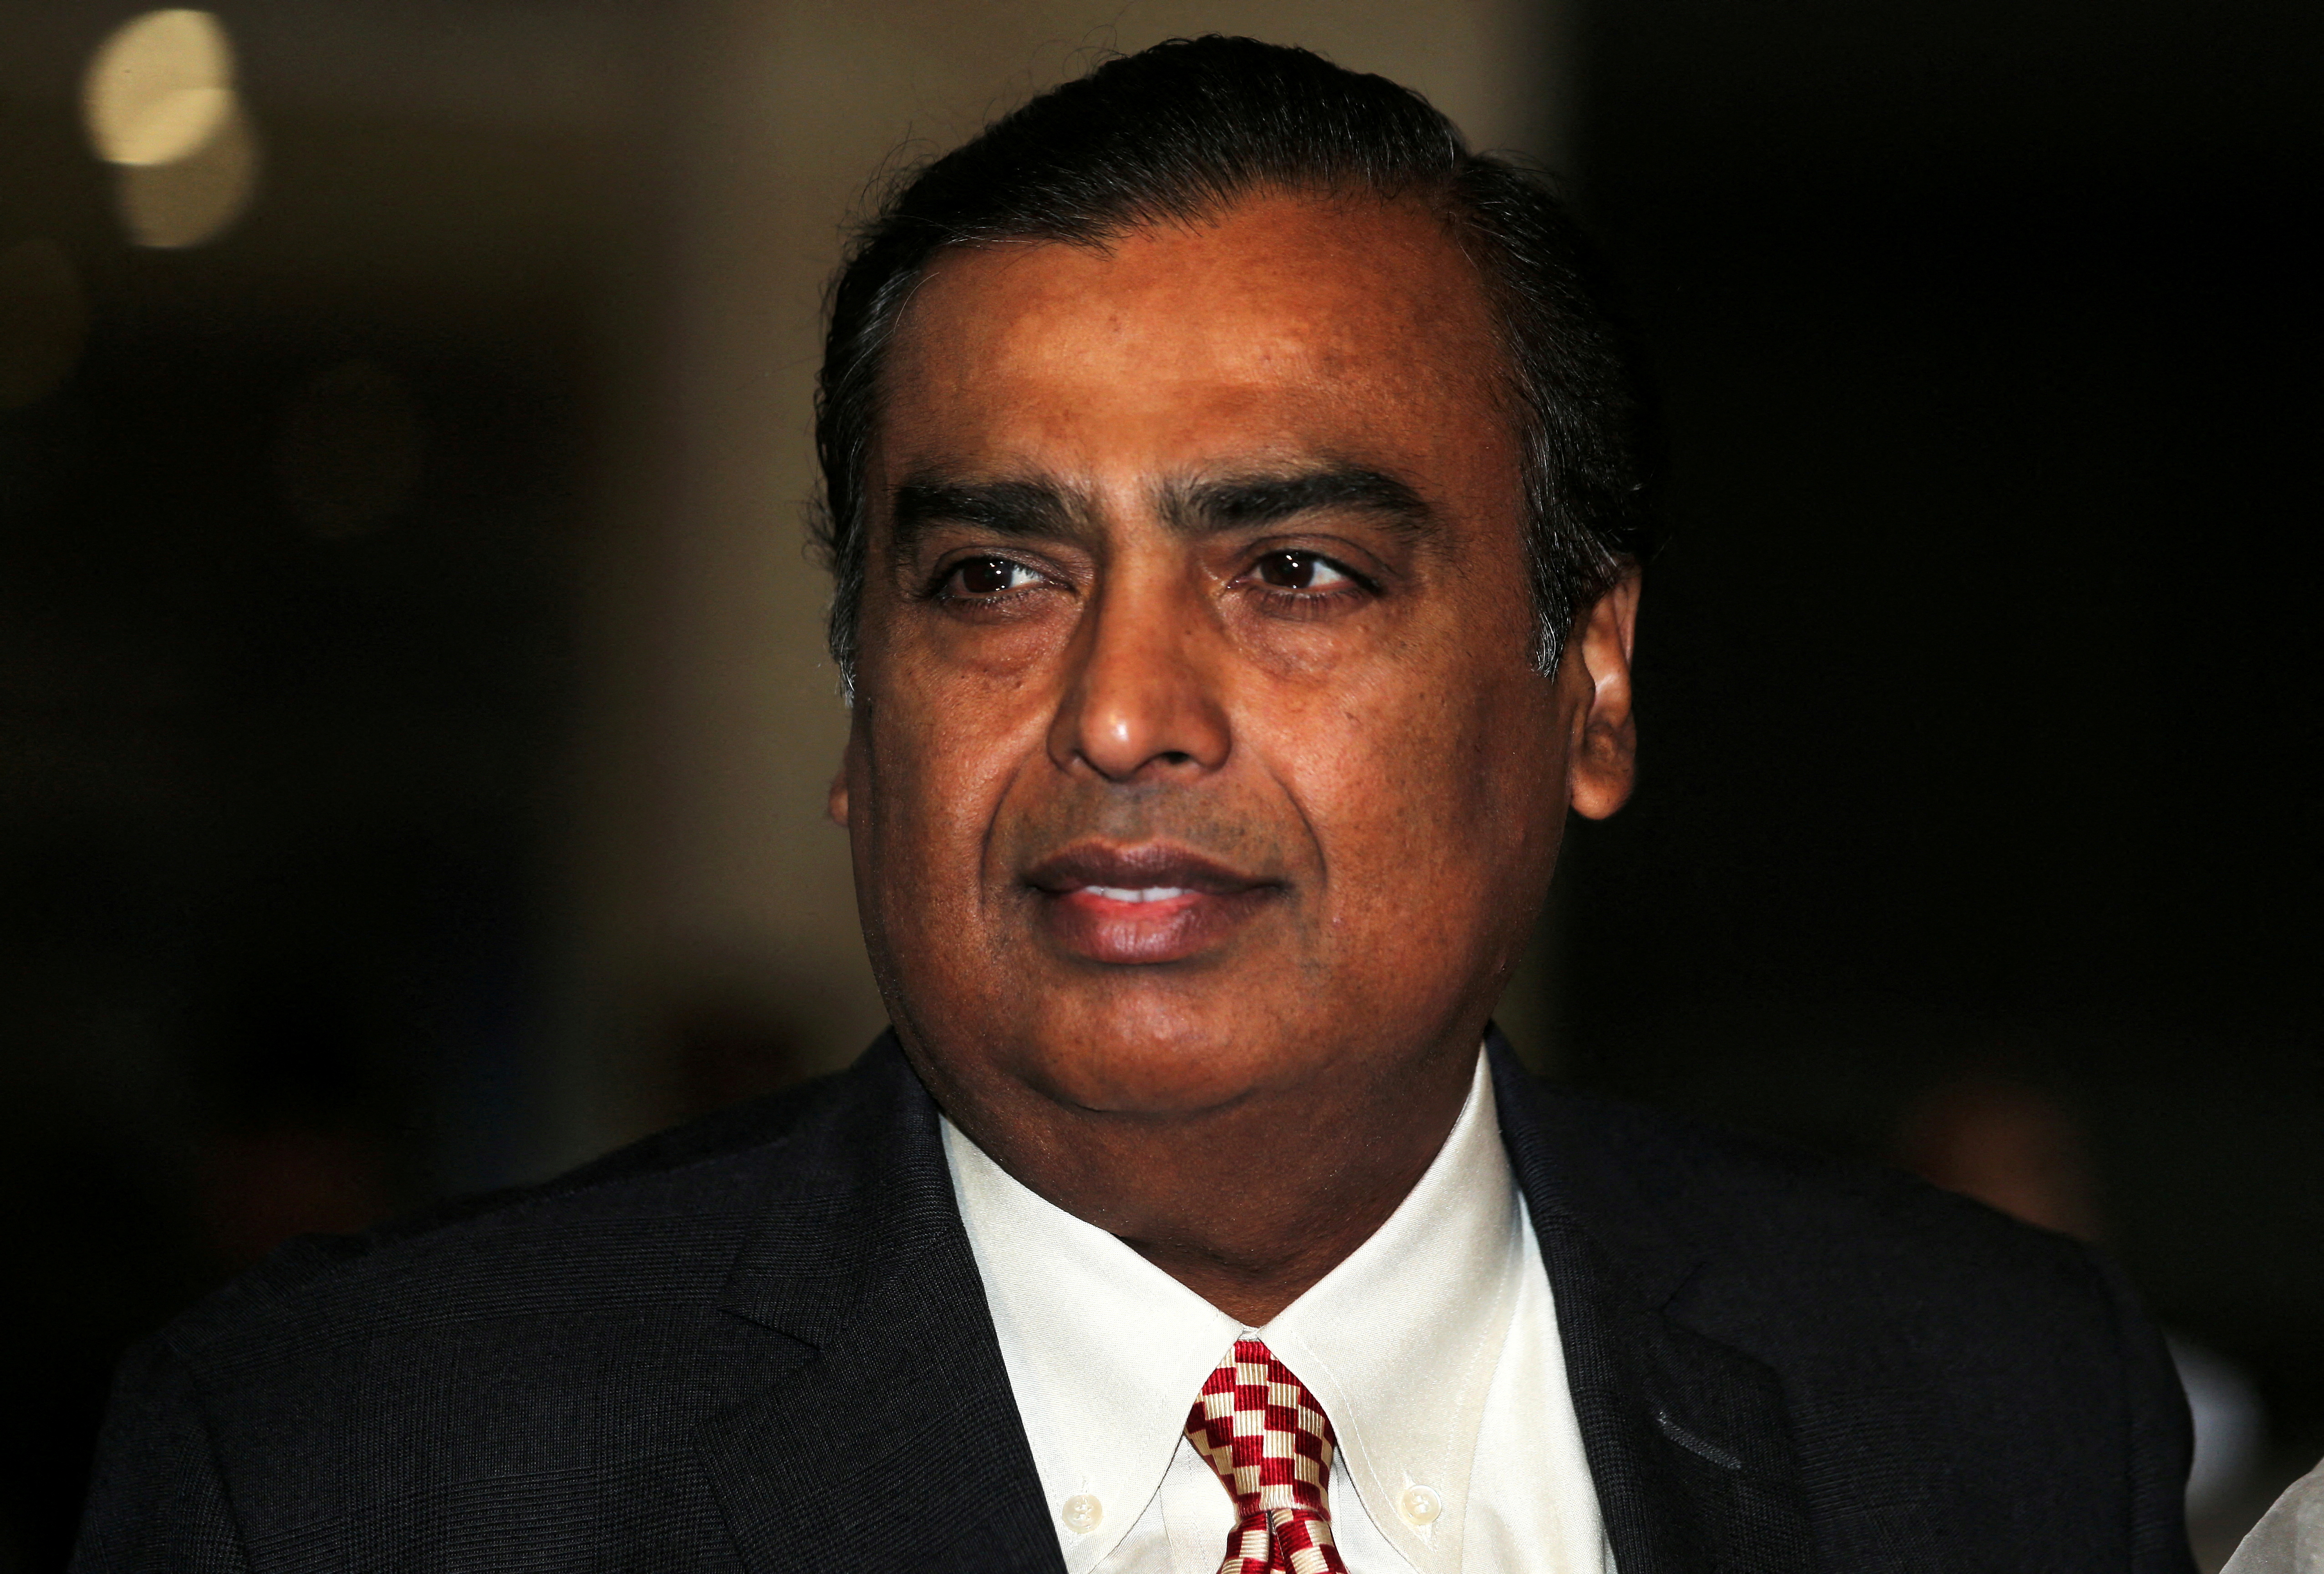 Mukesh Ambani, Chairman and Managing Director of Reliance Industries, arrives to address the company's annual general meeting in Mumbai